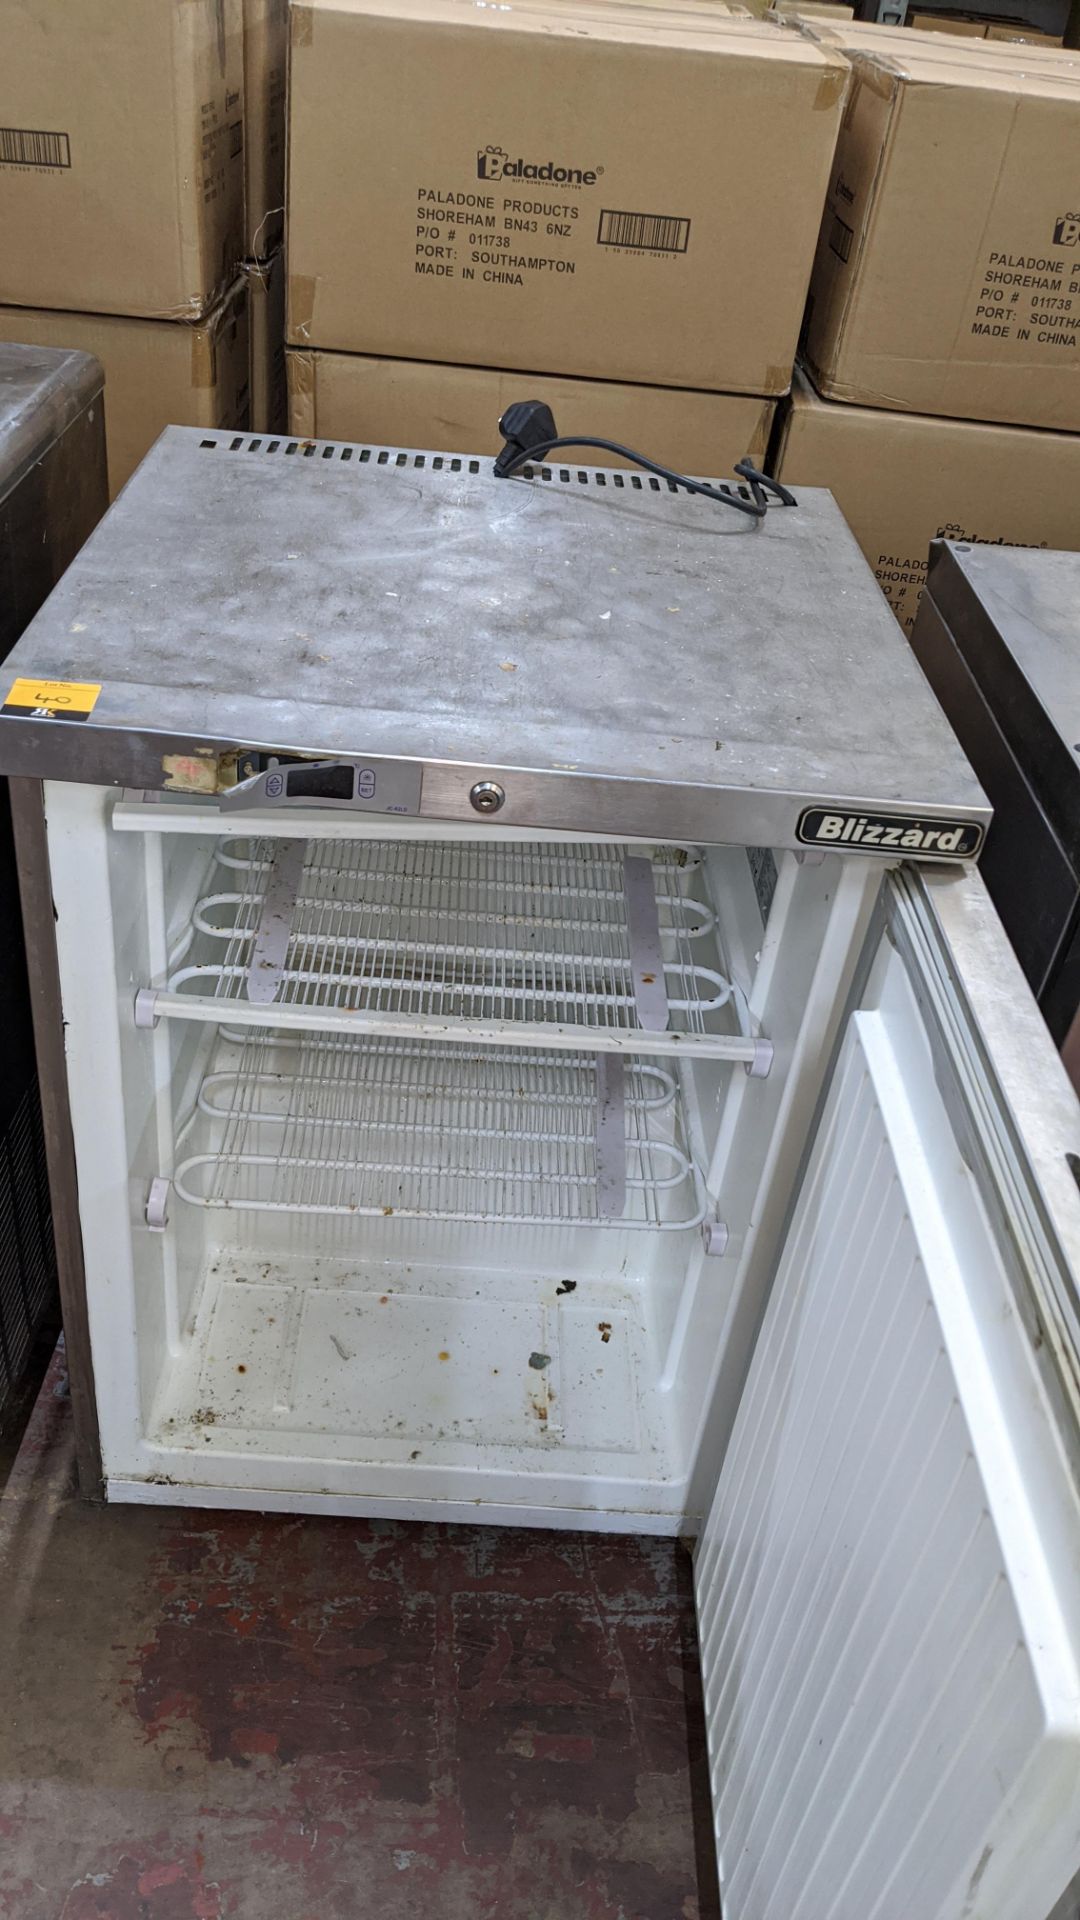 Blizzard stainless steel counter height fridge - Image 3 of 3